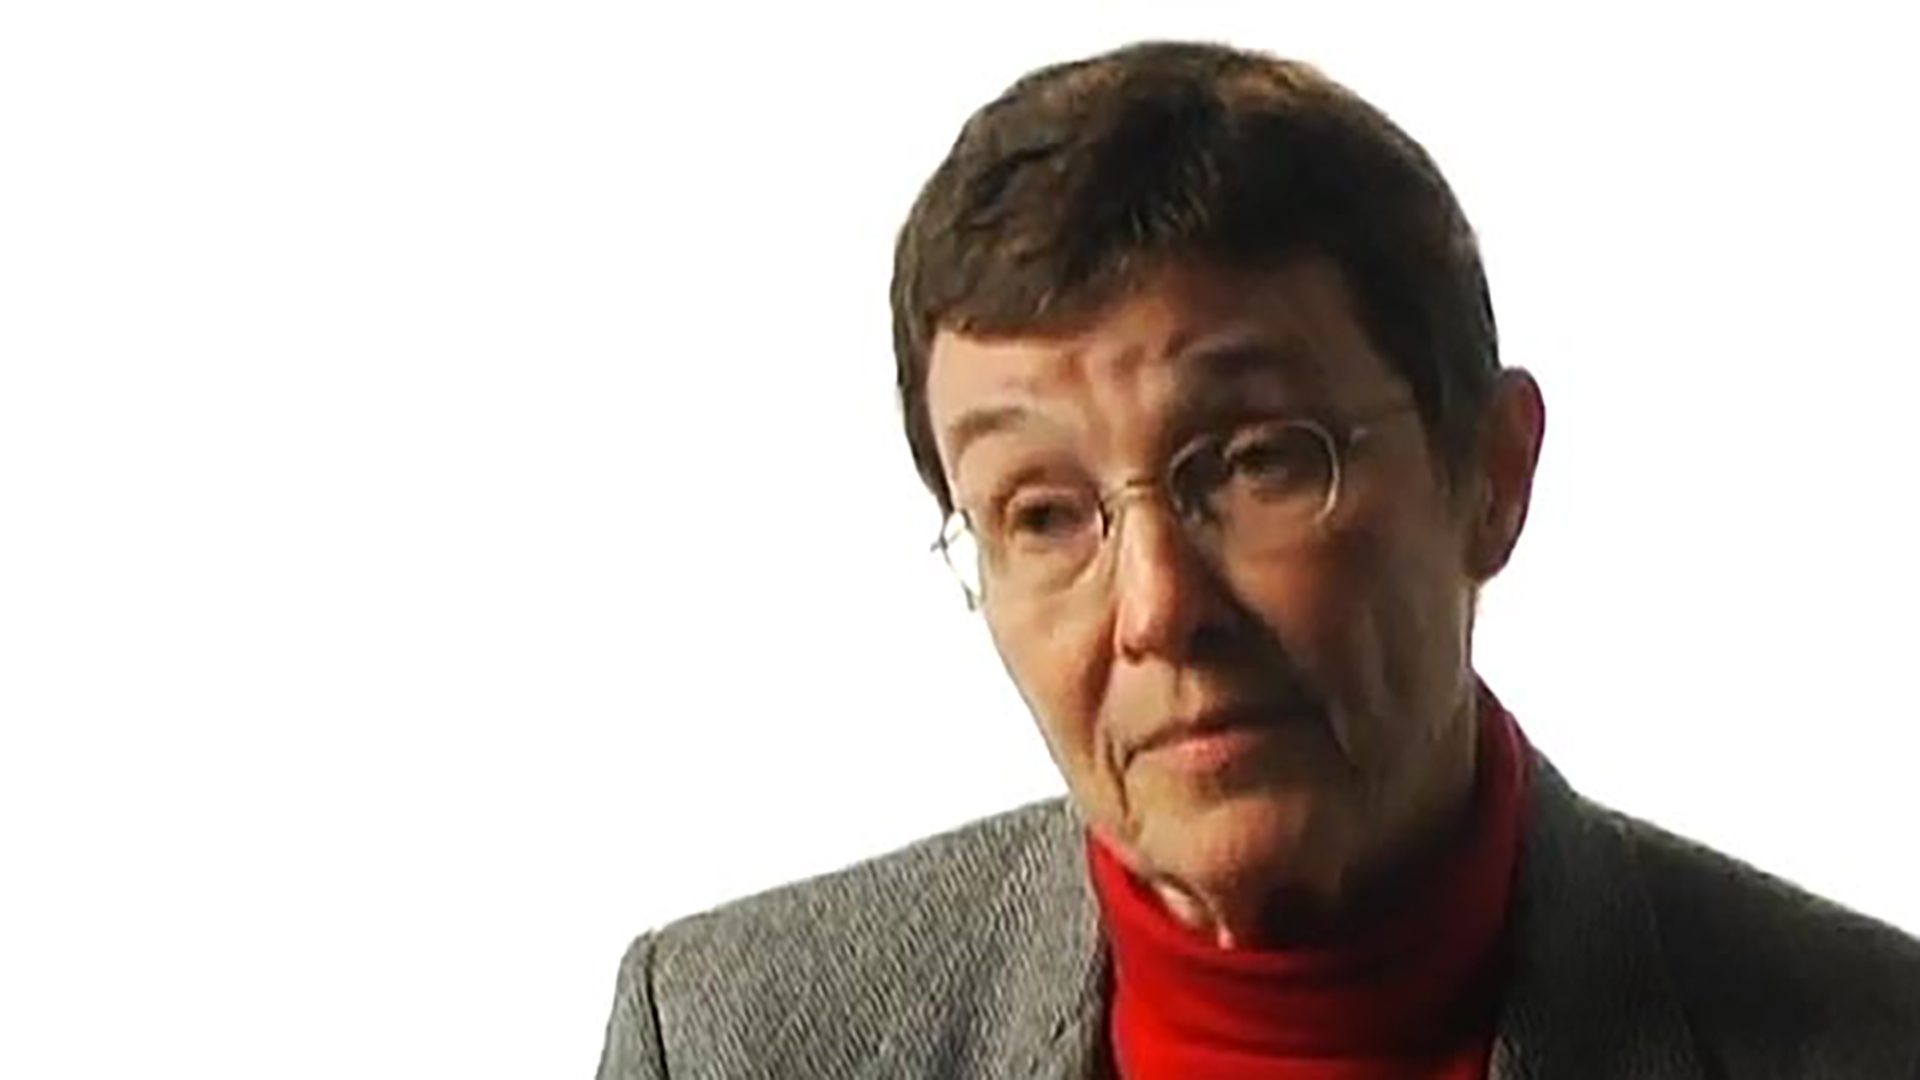 An older woman with short hair wearing glasses, a red turtleneck, and a gray jacket is interviewed against a white background